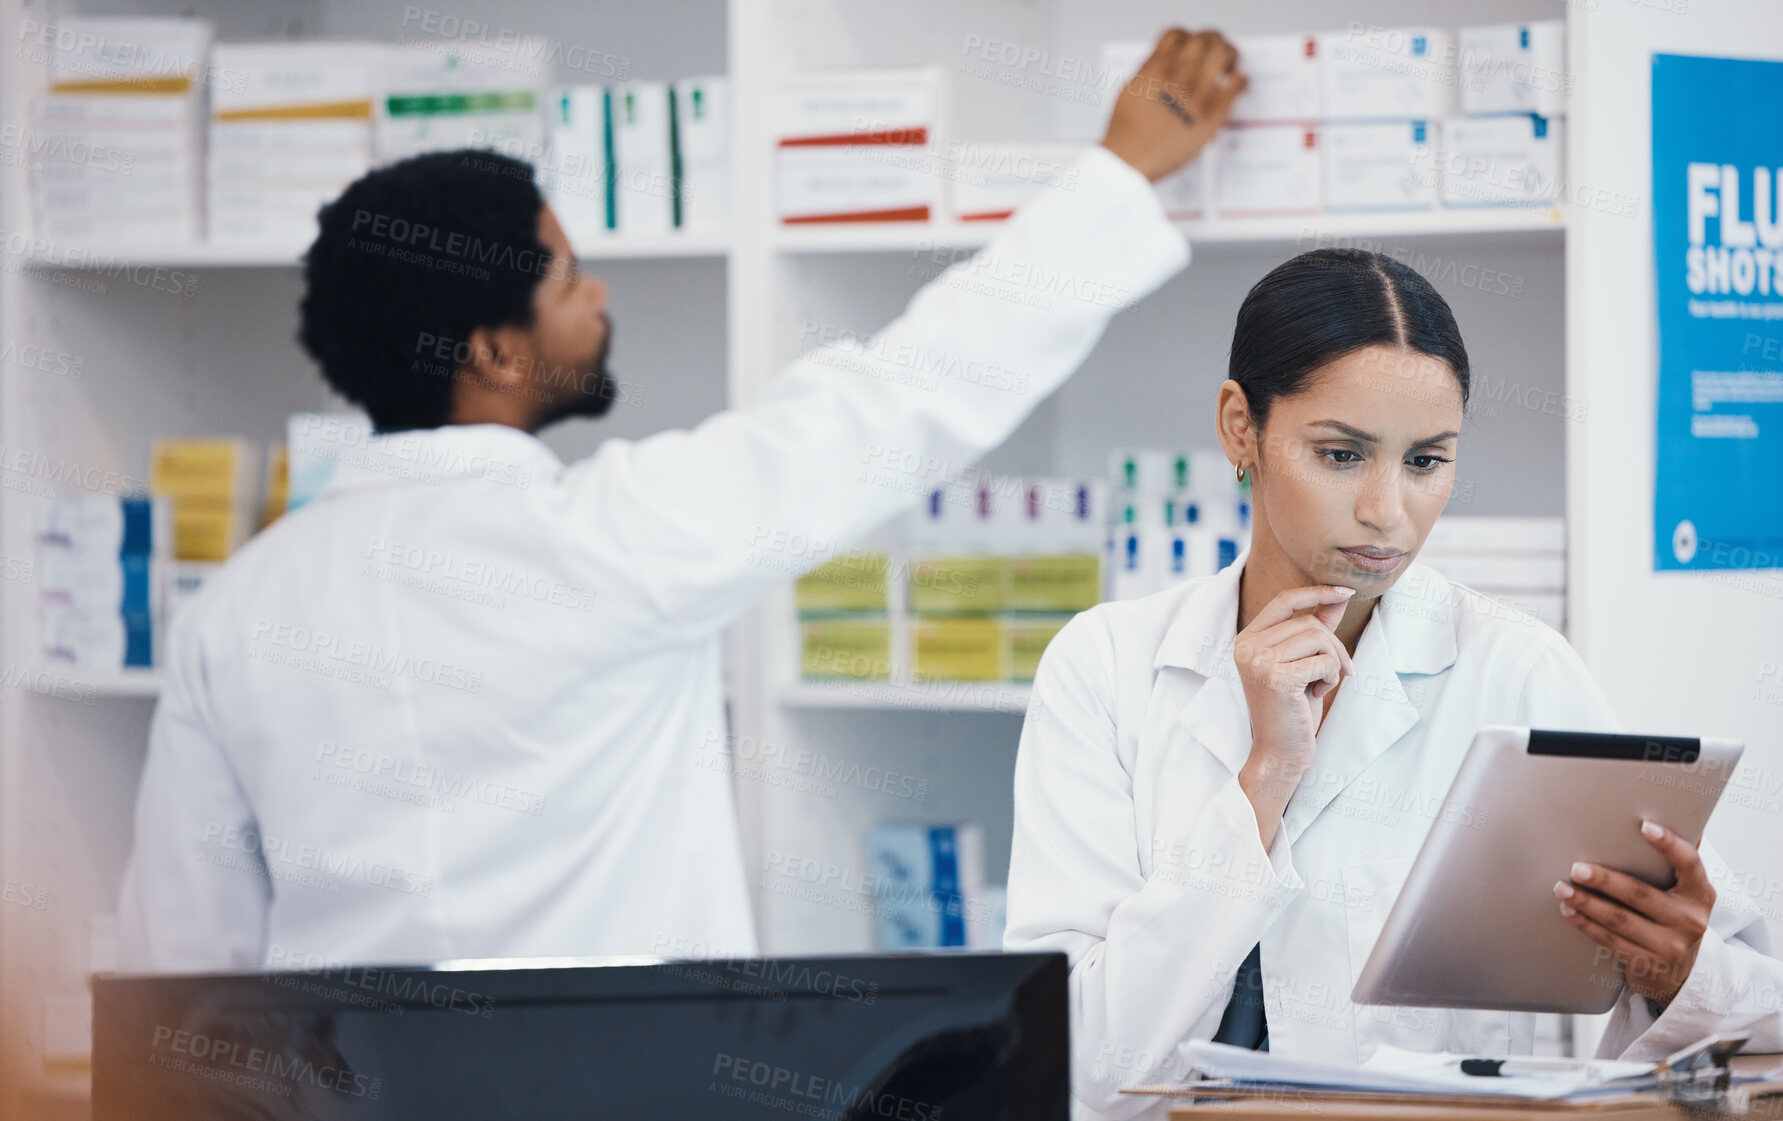 Buy stock photo Thinking pharmacist, woman and tablet in medicine check, stock take or medical research in drugs store. Serious, ideas and pharmacy worker on technology pills, checklist or ecommerce healthcare order